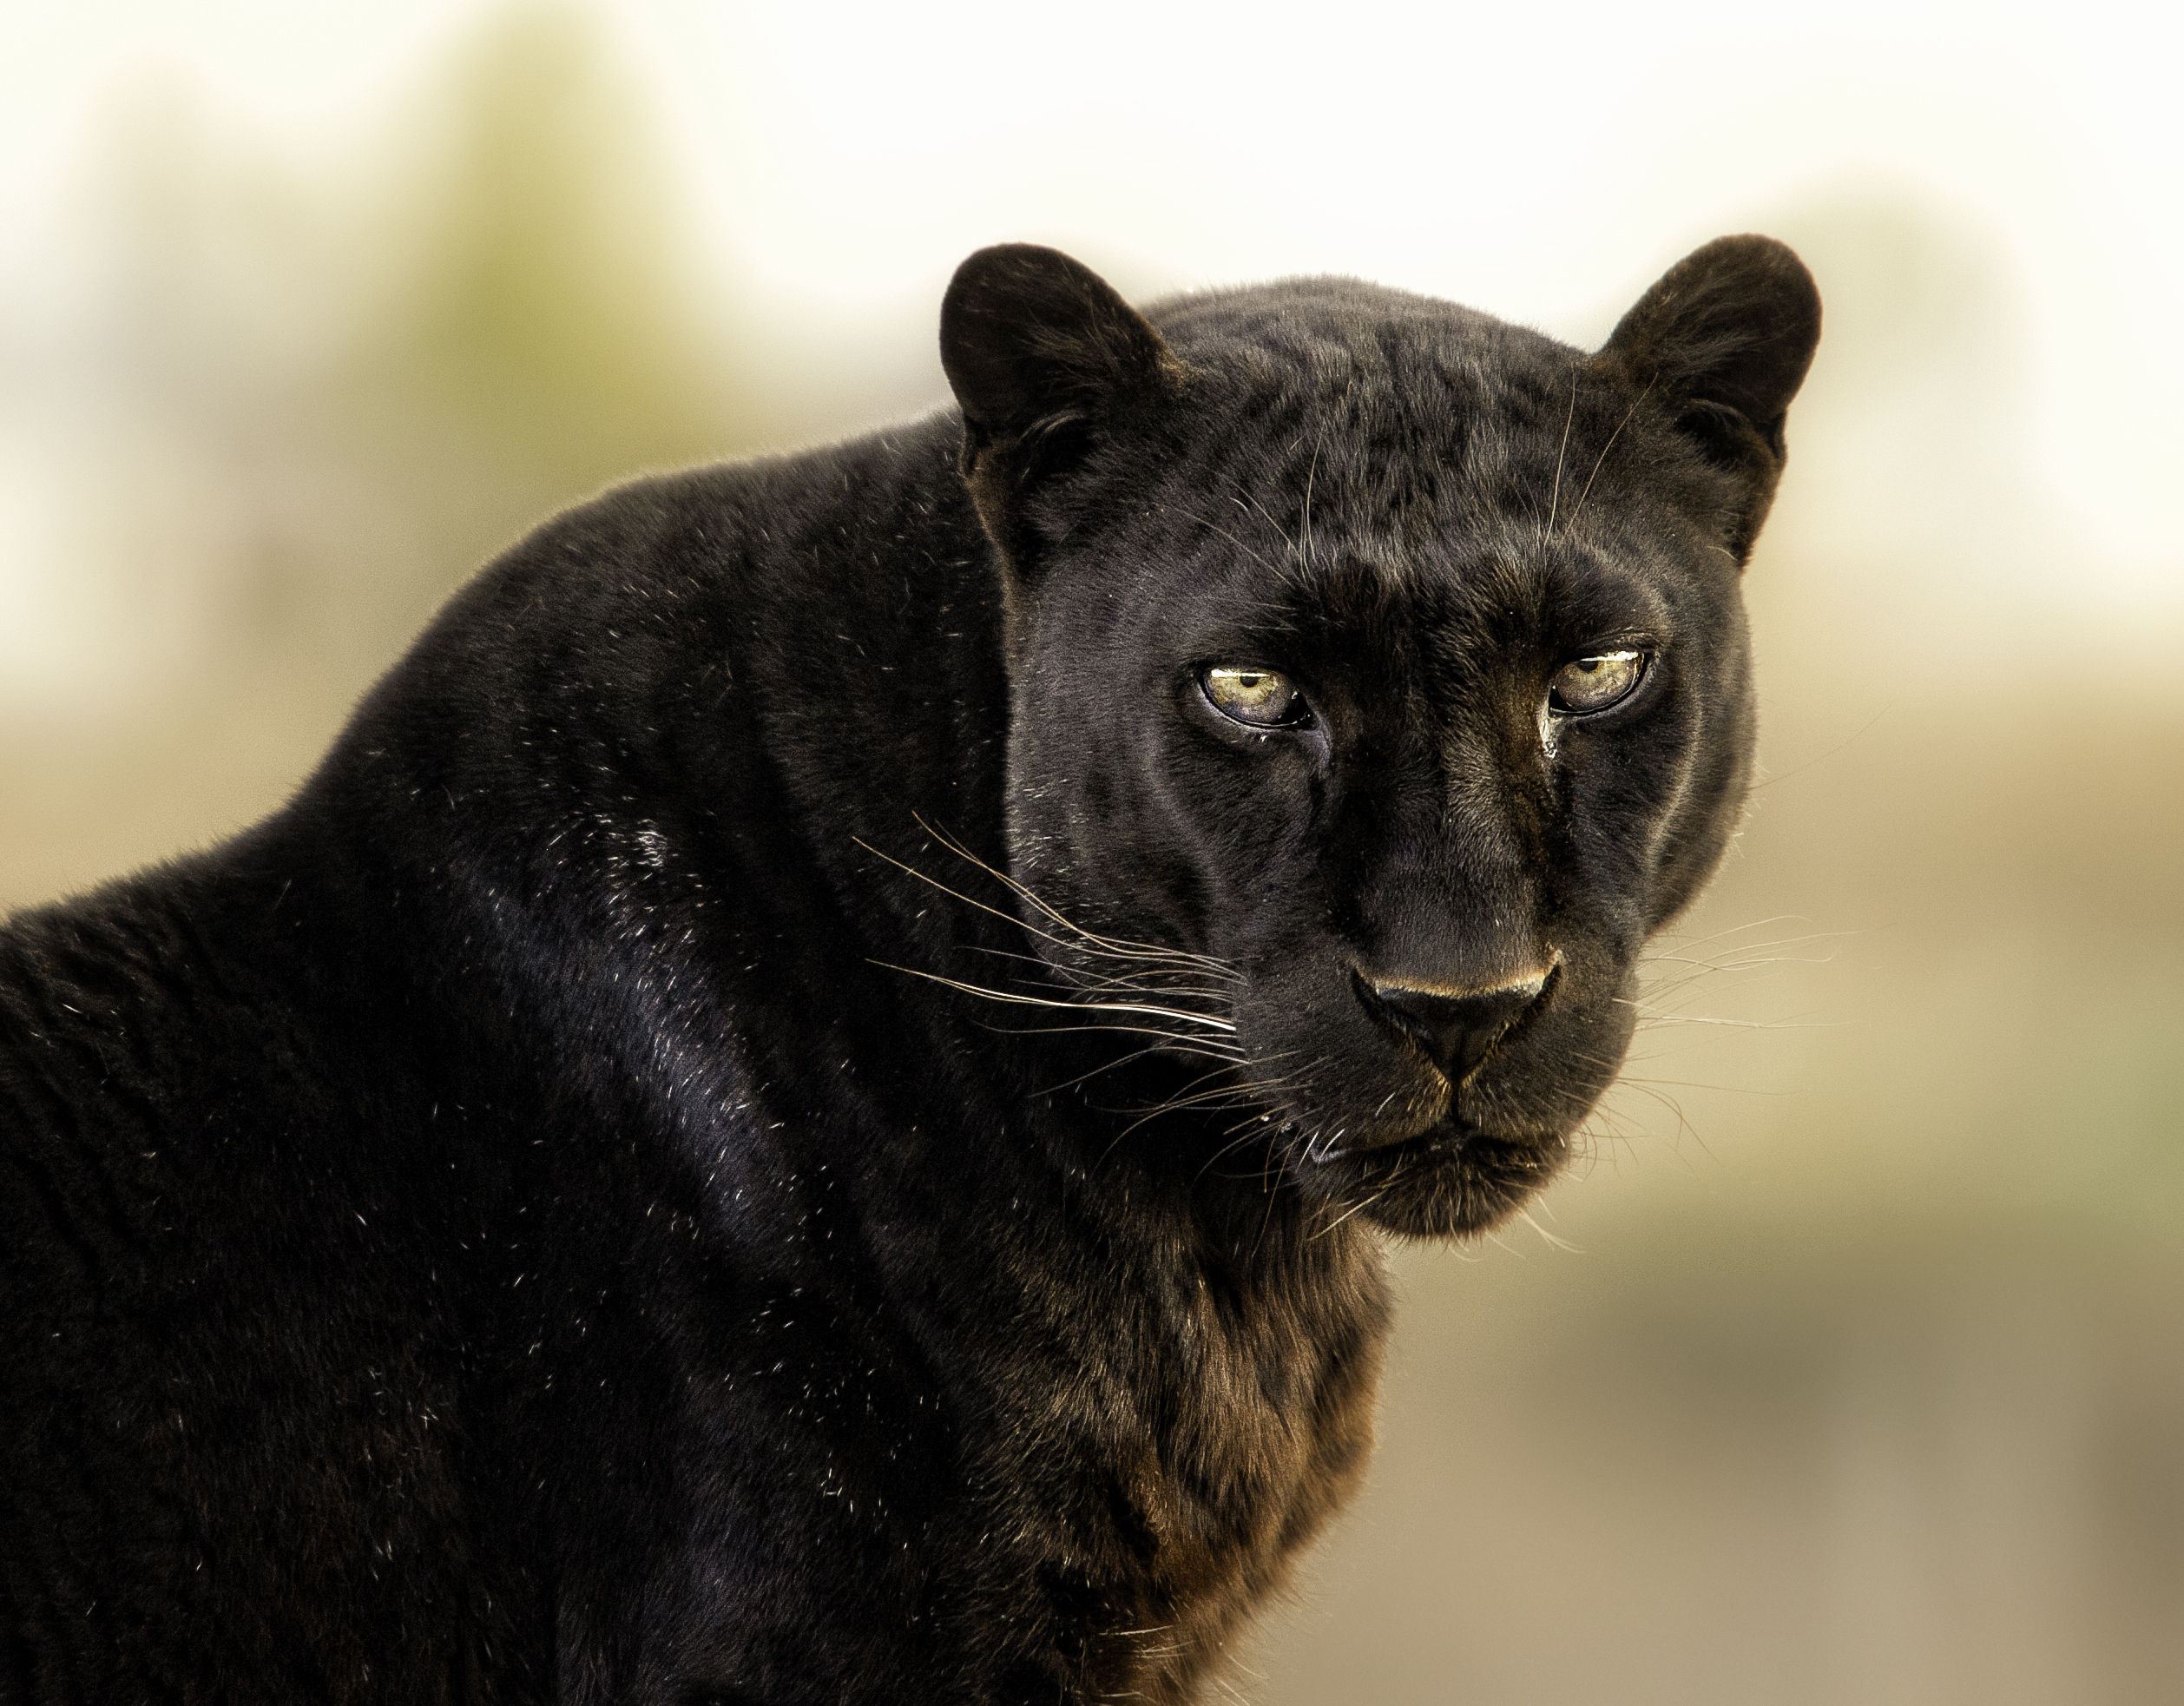 A black panther is looking directly at the camera with a serious expression. Its fur is sleek and shiny, and its eyes are focused and intense